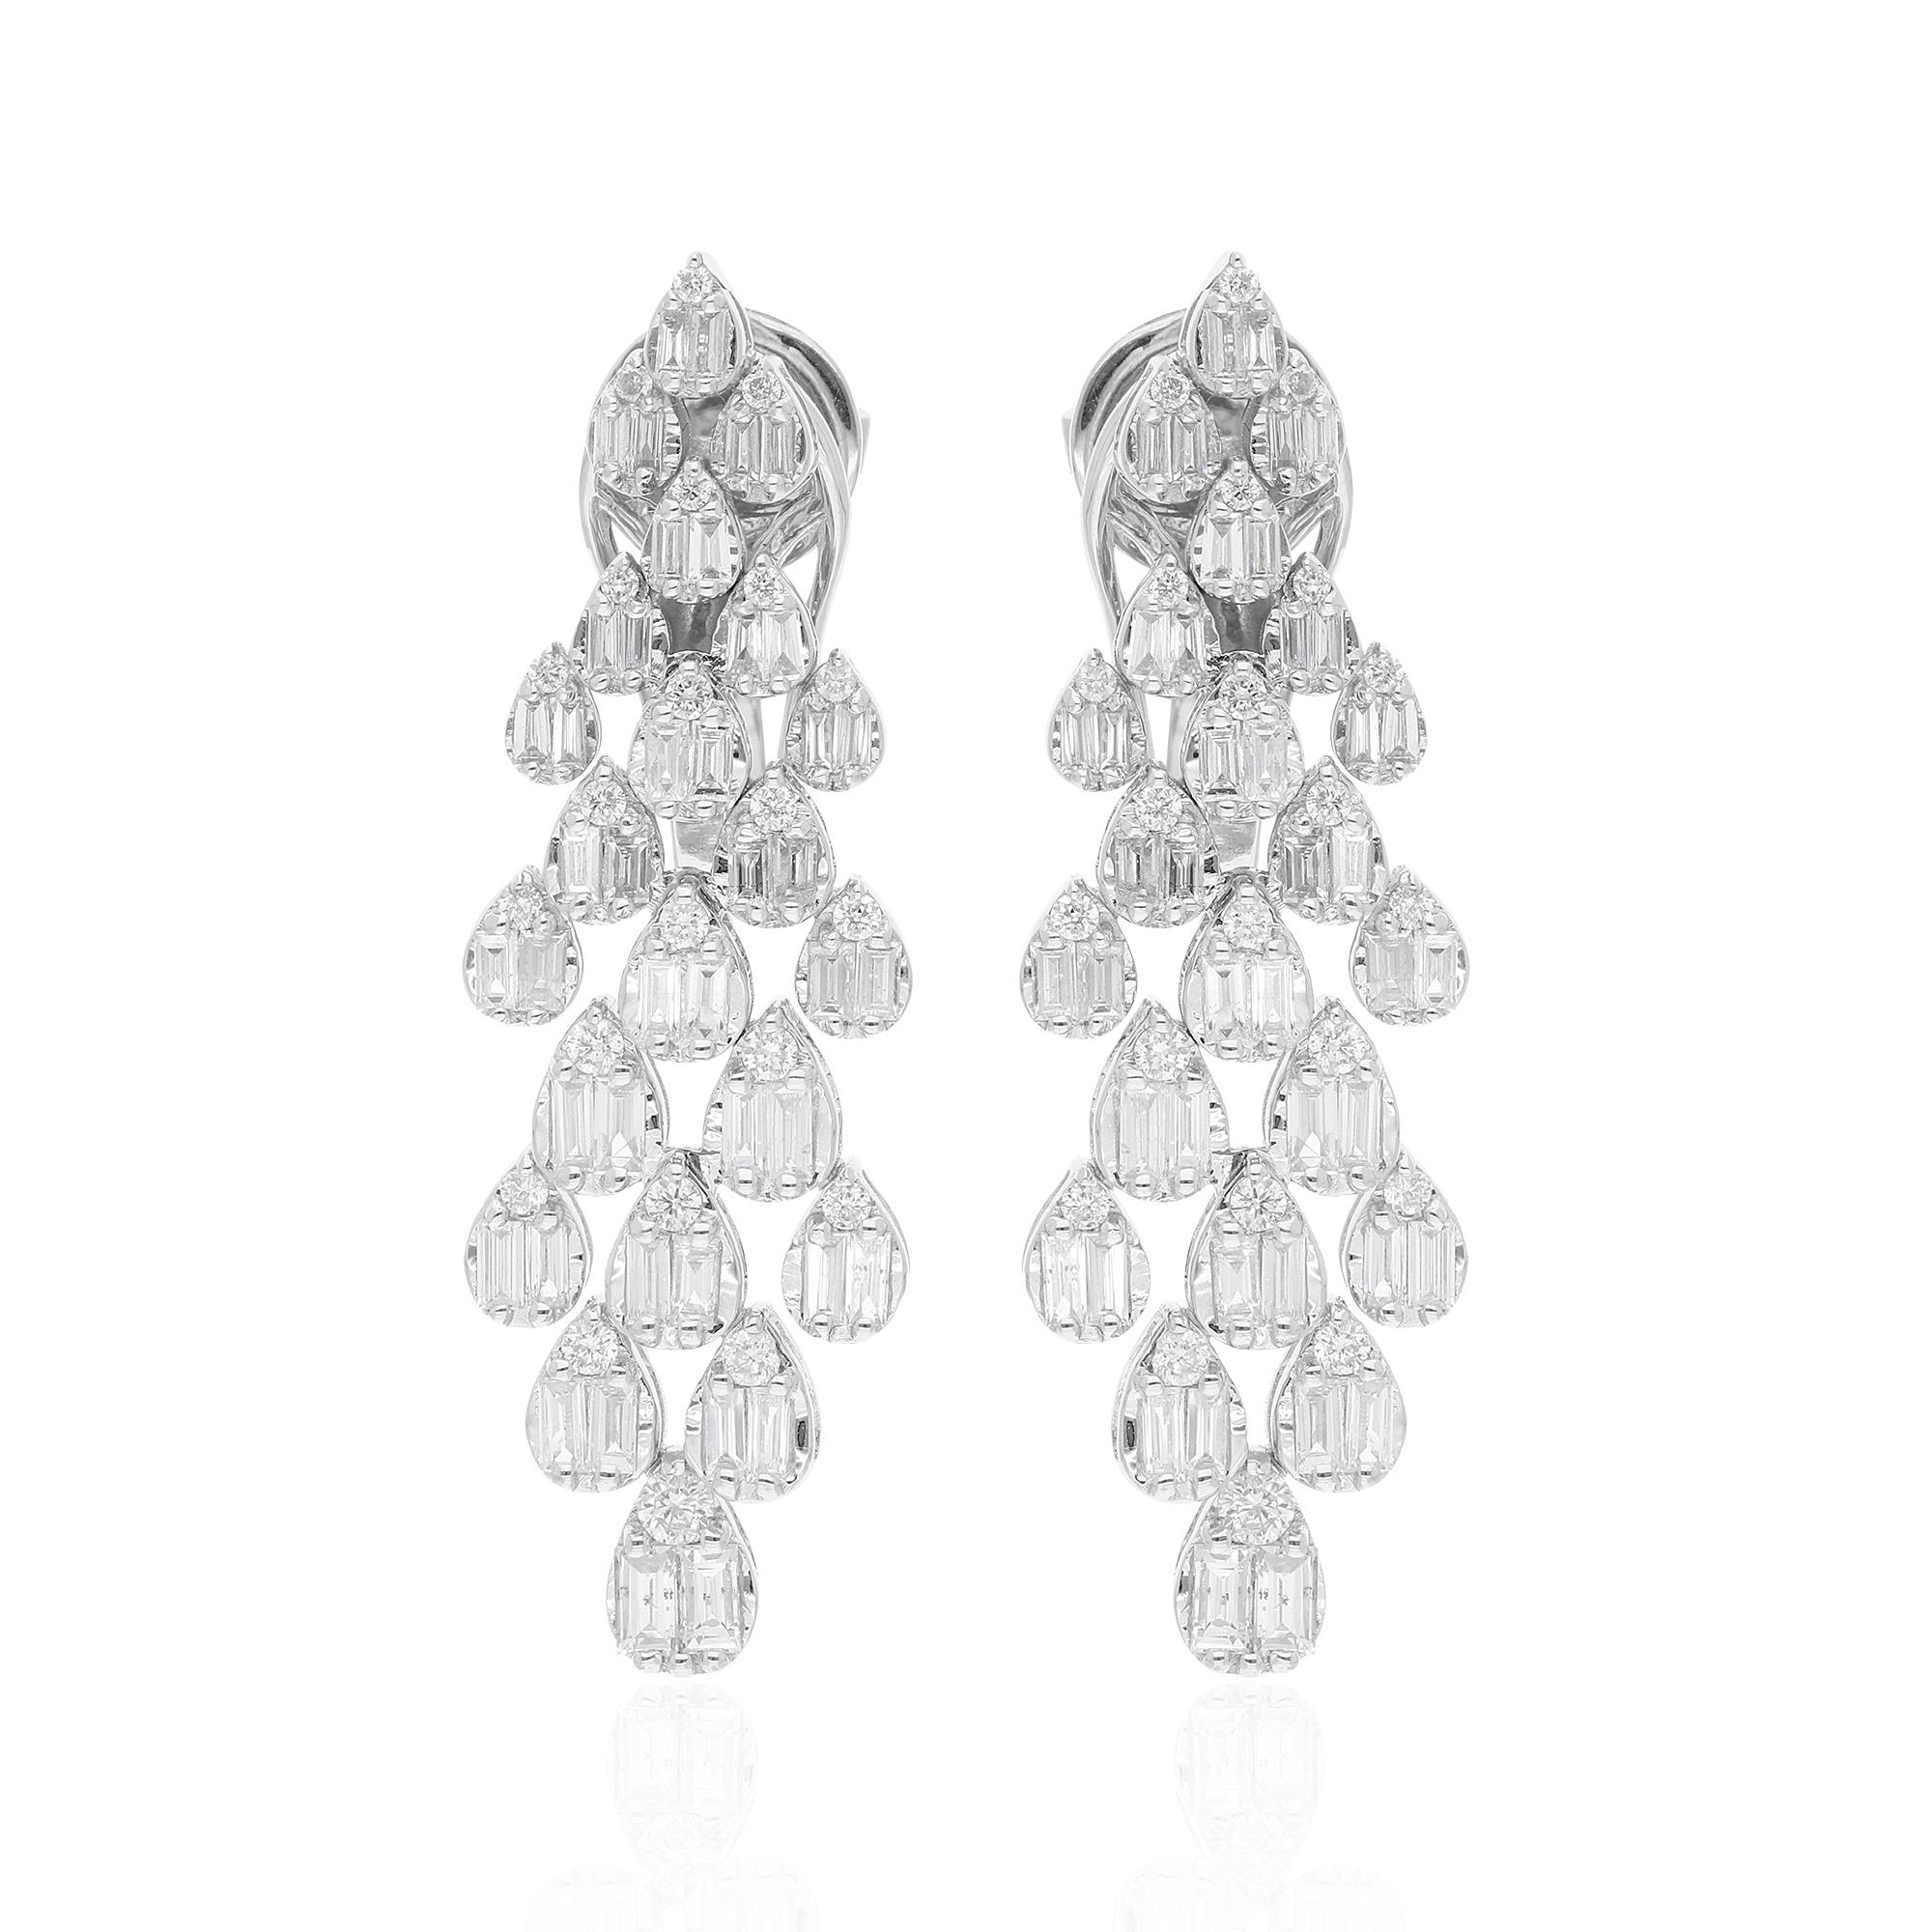 Item Code :- SEE-14588
Gross Wt. :- 10.17 gm
18k White Gold Wt. :- 9.84 gm
Natural Diamond Wt. :- 1.65 Ct. ( AVERAGE DIAMOND CLARITY SI1-SI2 & COLOR H-I )
Earrings Size :- 35 mm approx.

✦ Sizing
.....................
We can adjust most items to fit